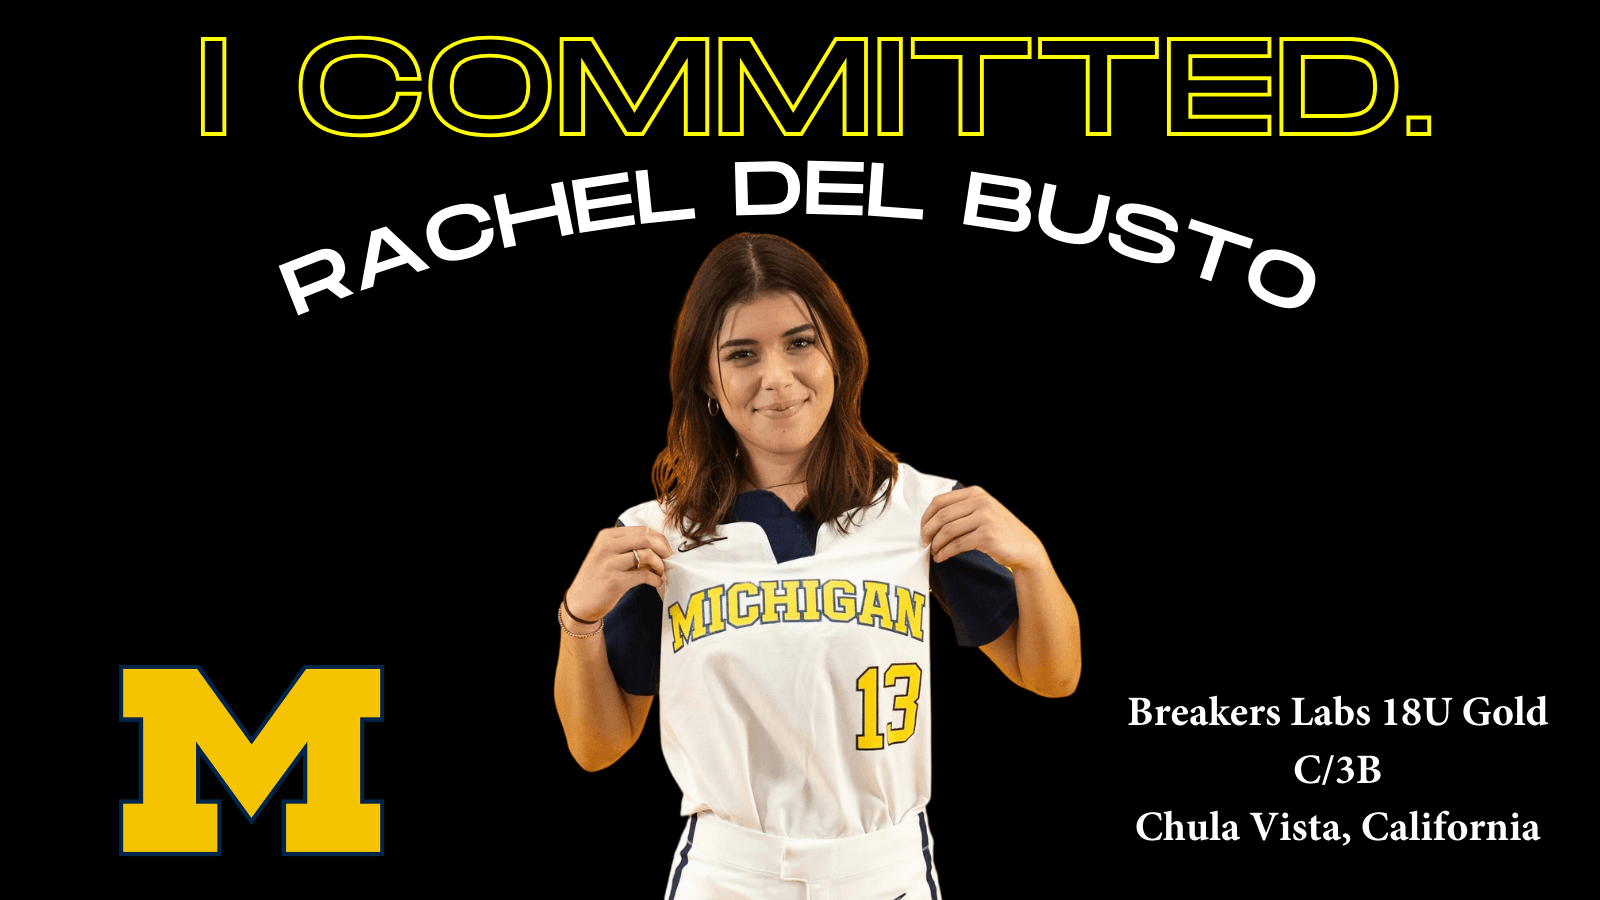 I Committed: Rachel Del Busto to Compete with Michigan Wolverines